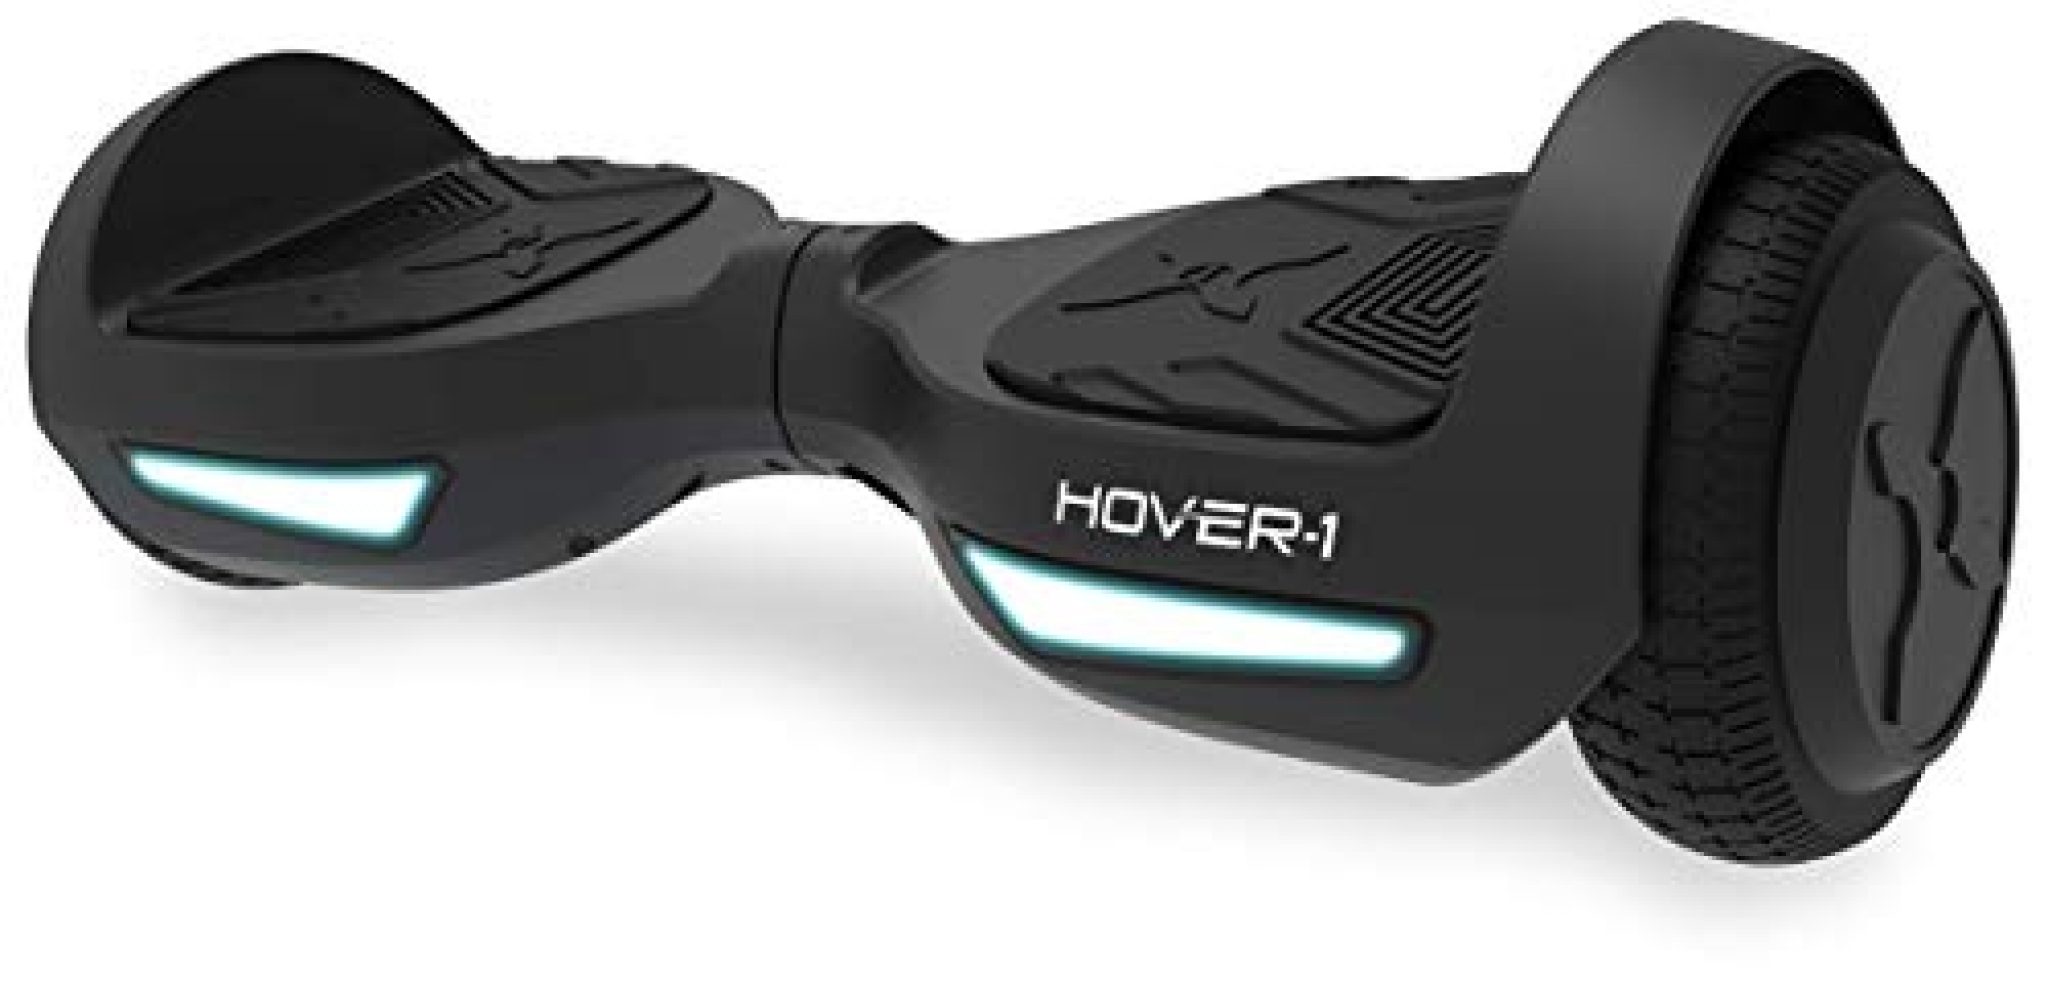 oneboard hoverboard